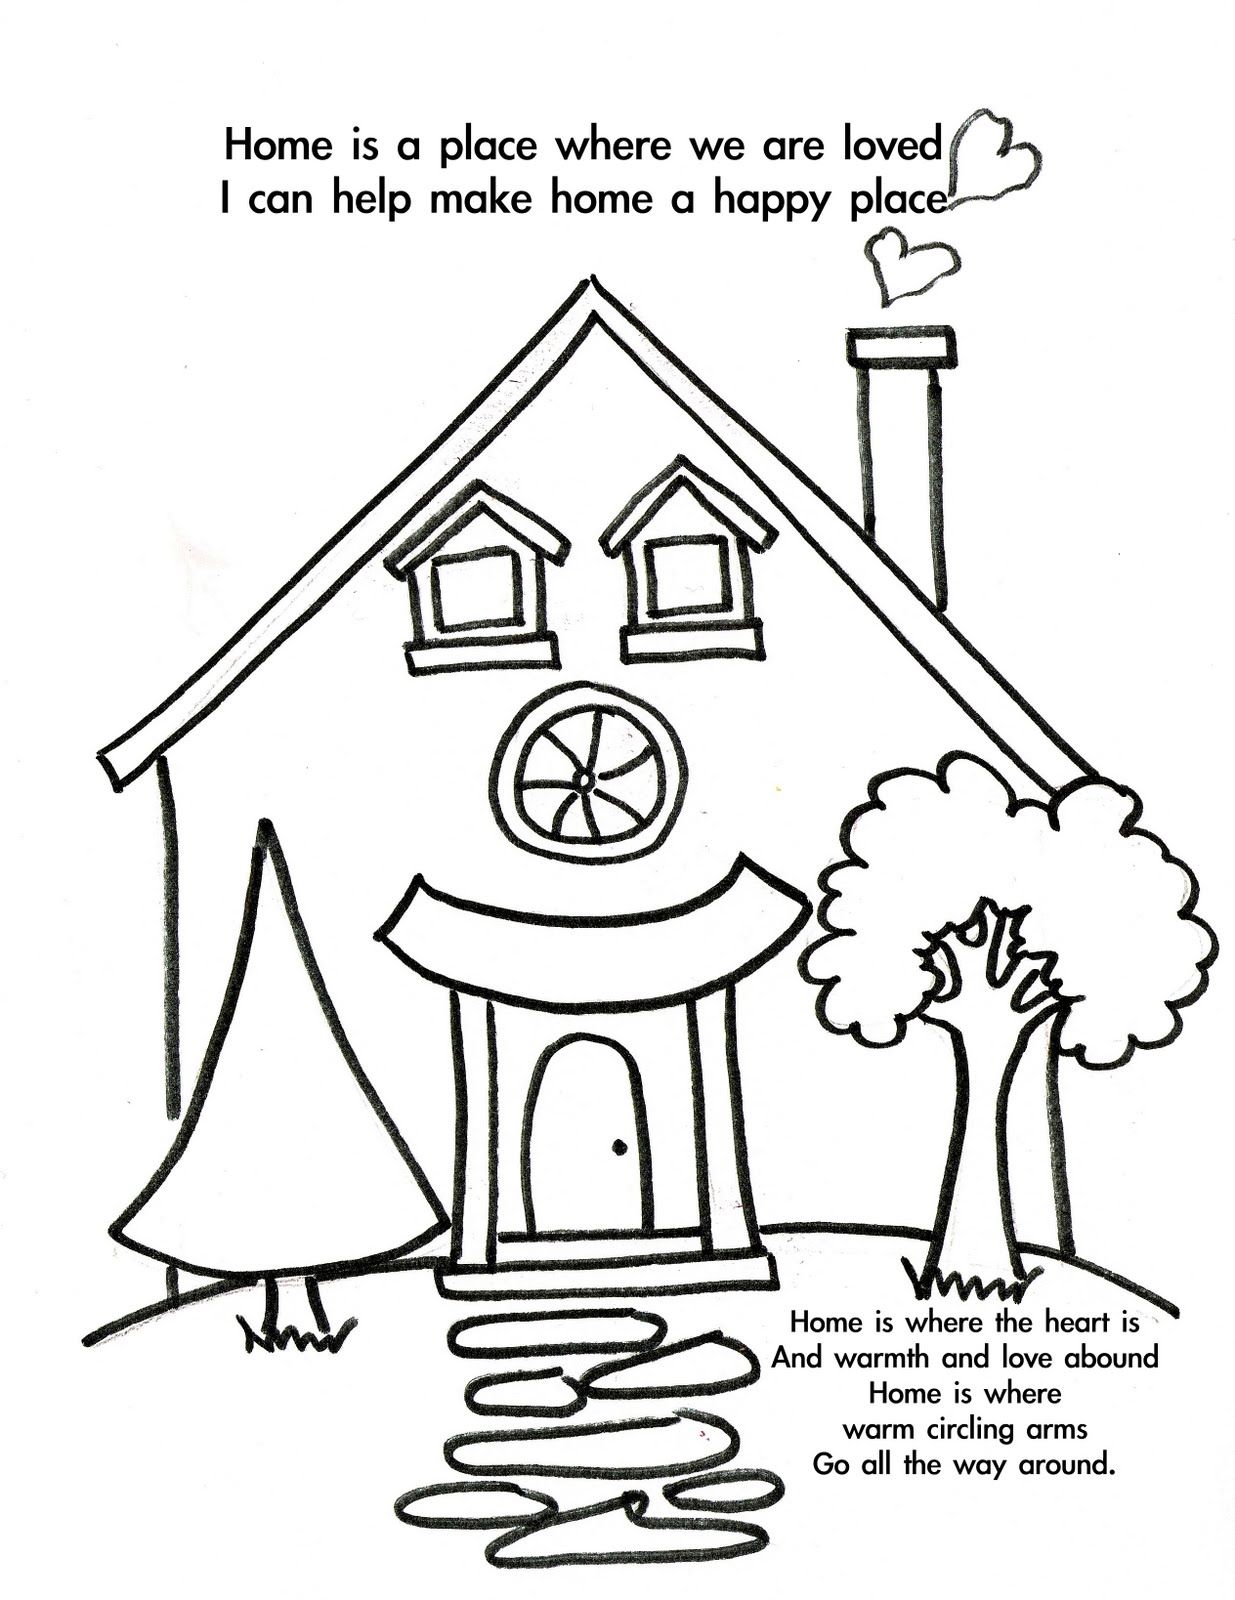 876 Cartoon Home Coloring Pages for Adult